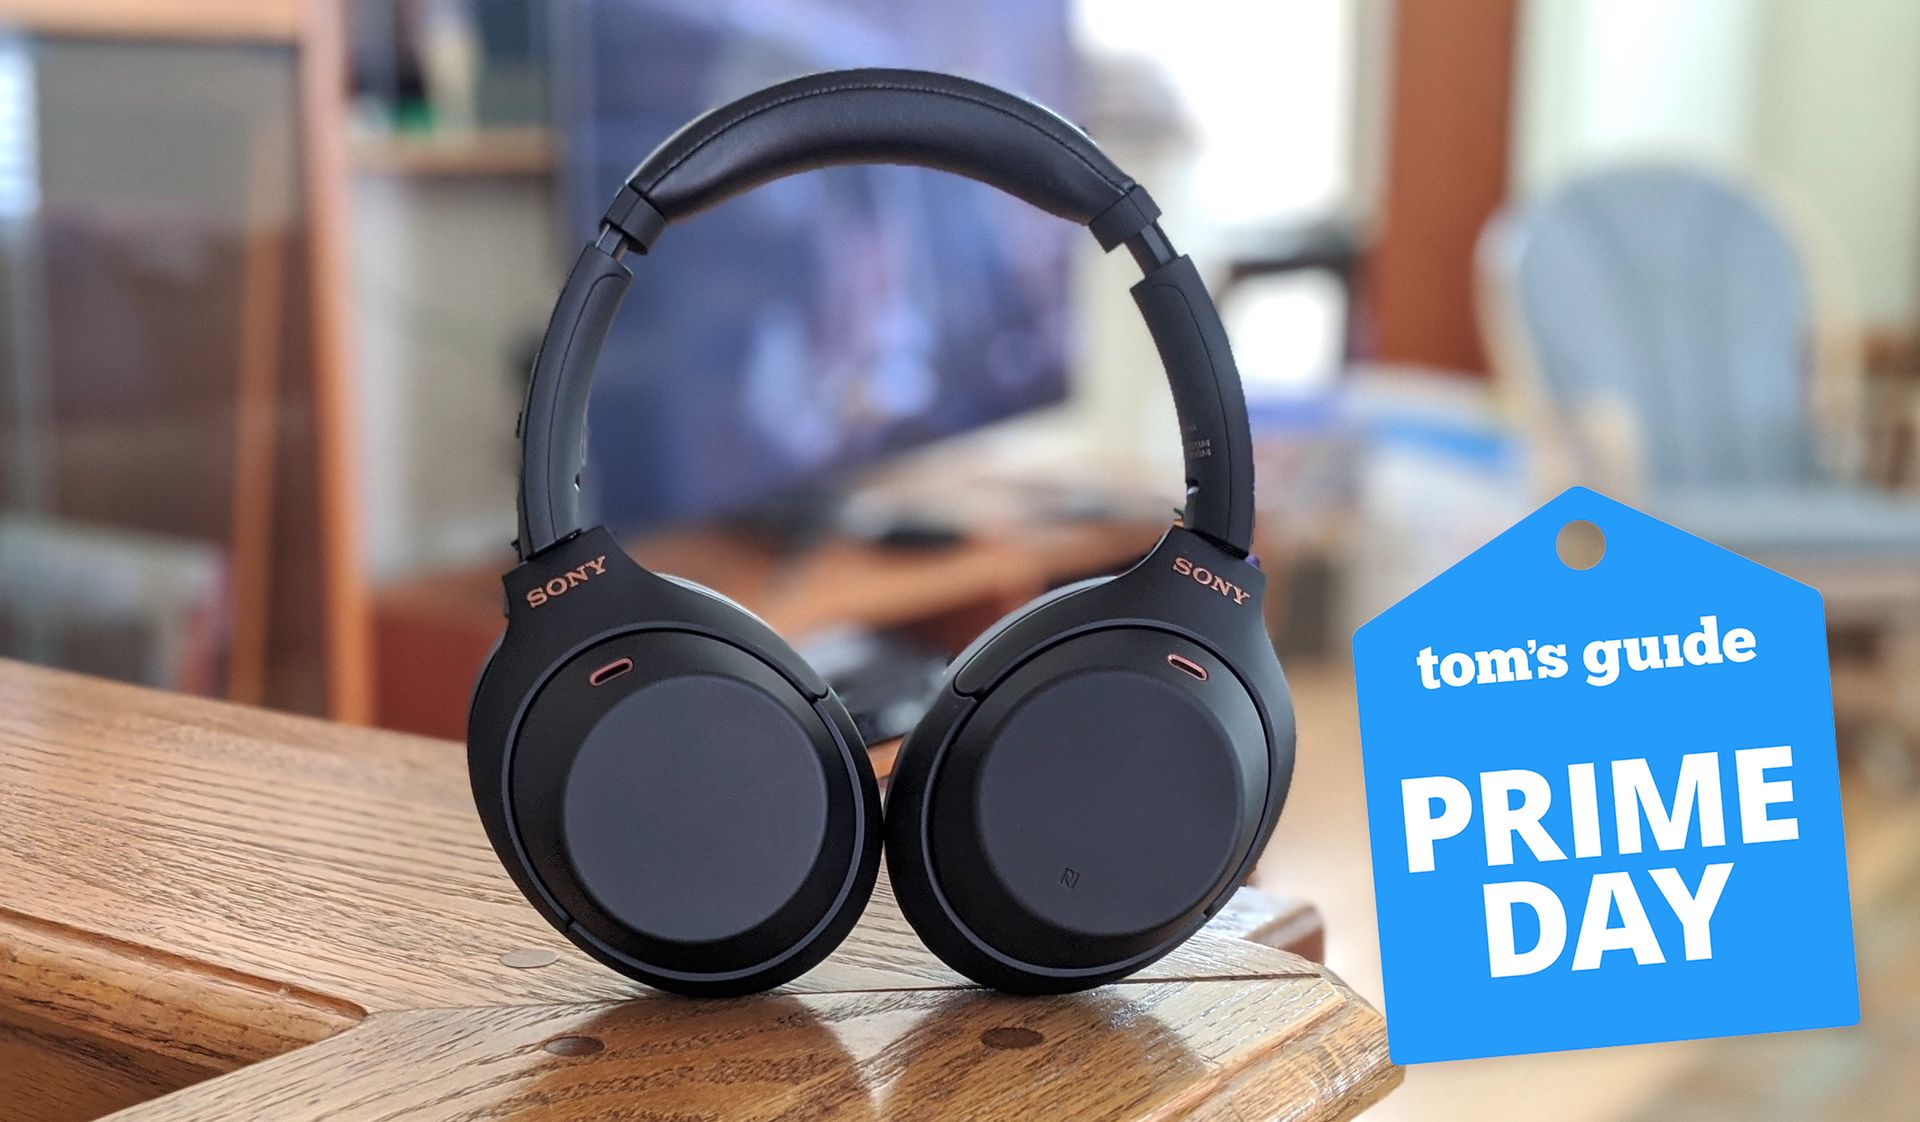 The best Prime Day headphones deal is Sony WH1000XM4 for 248 Tom's